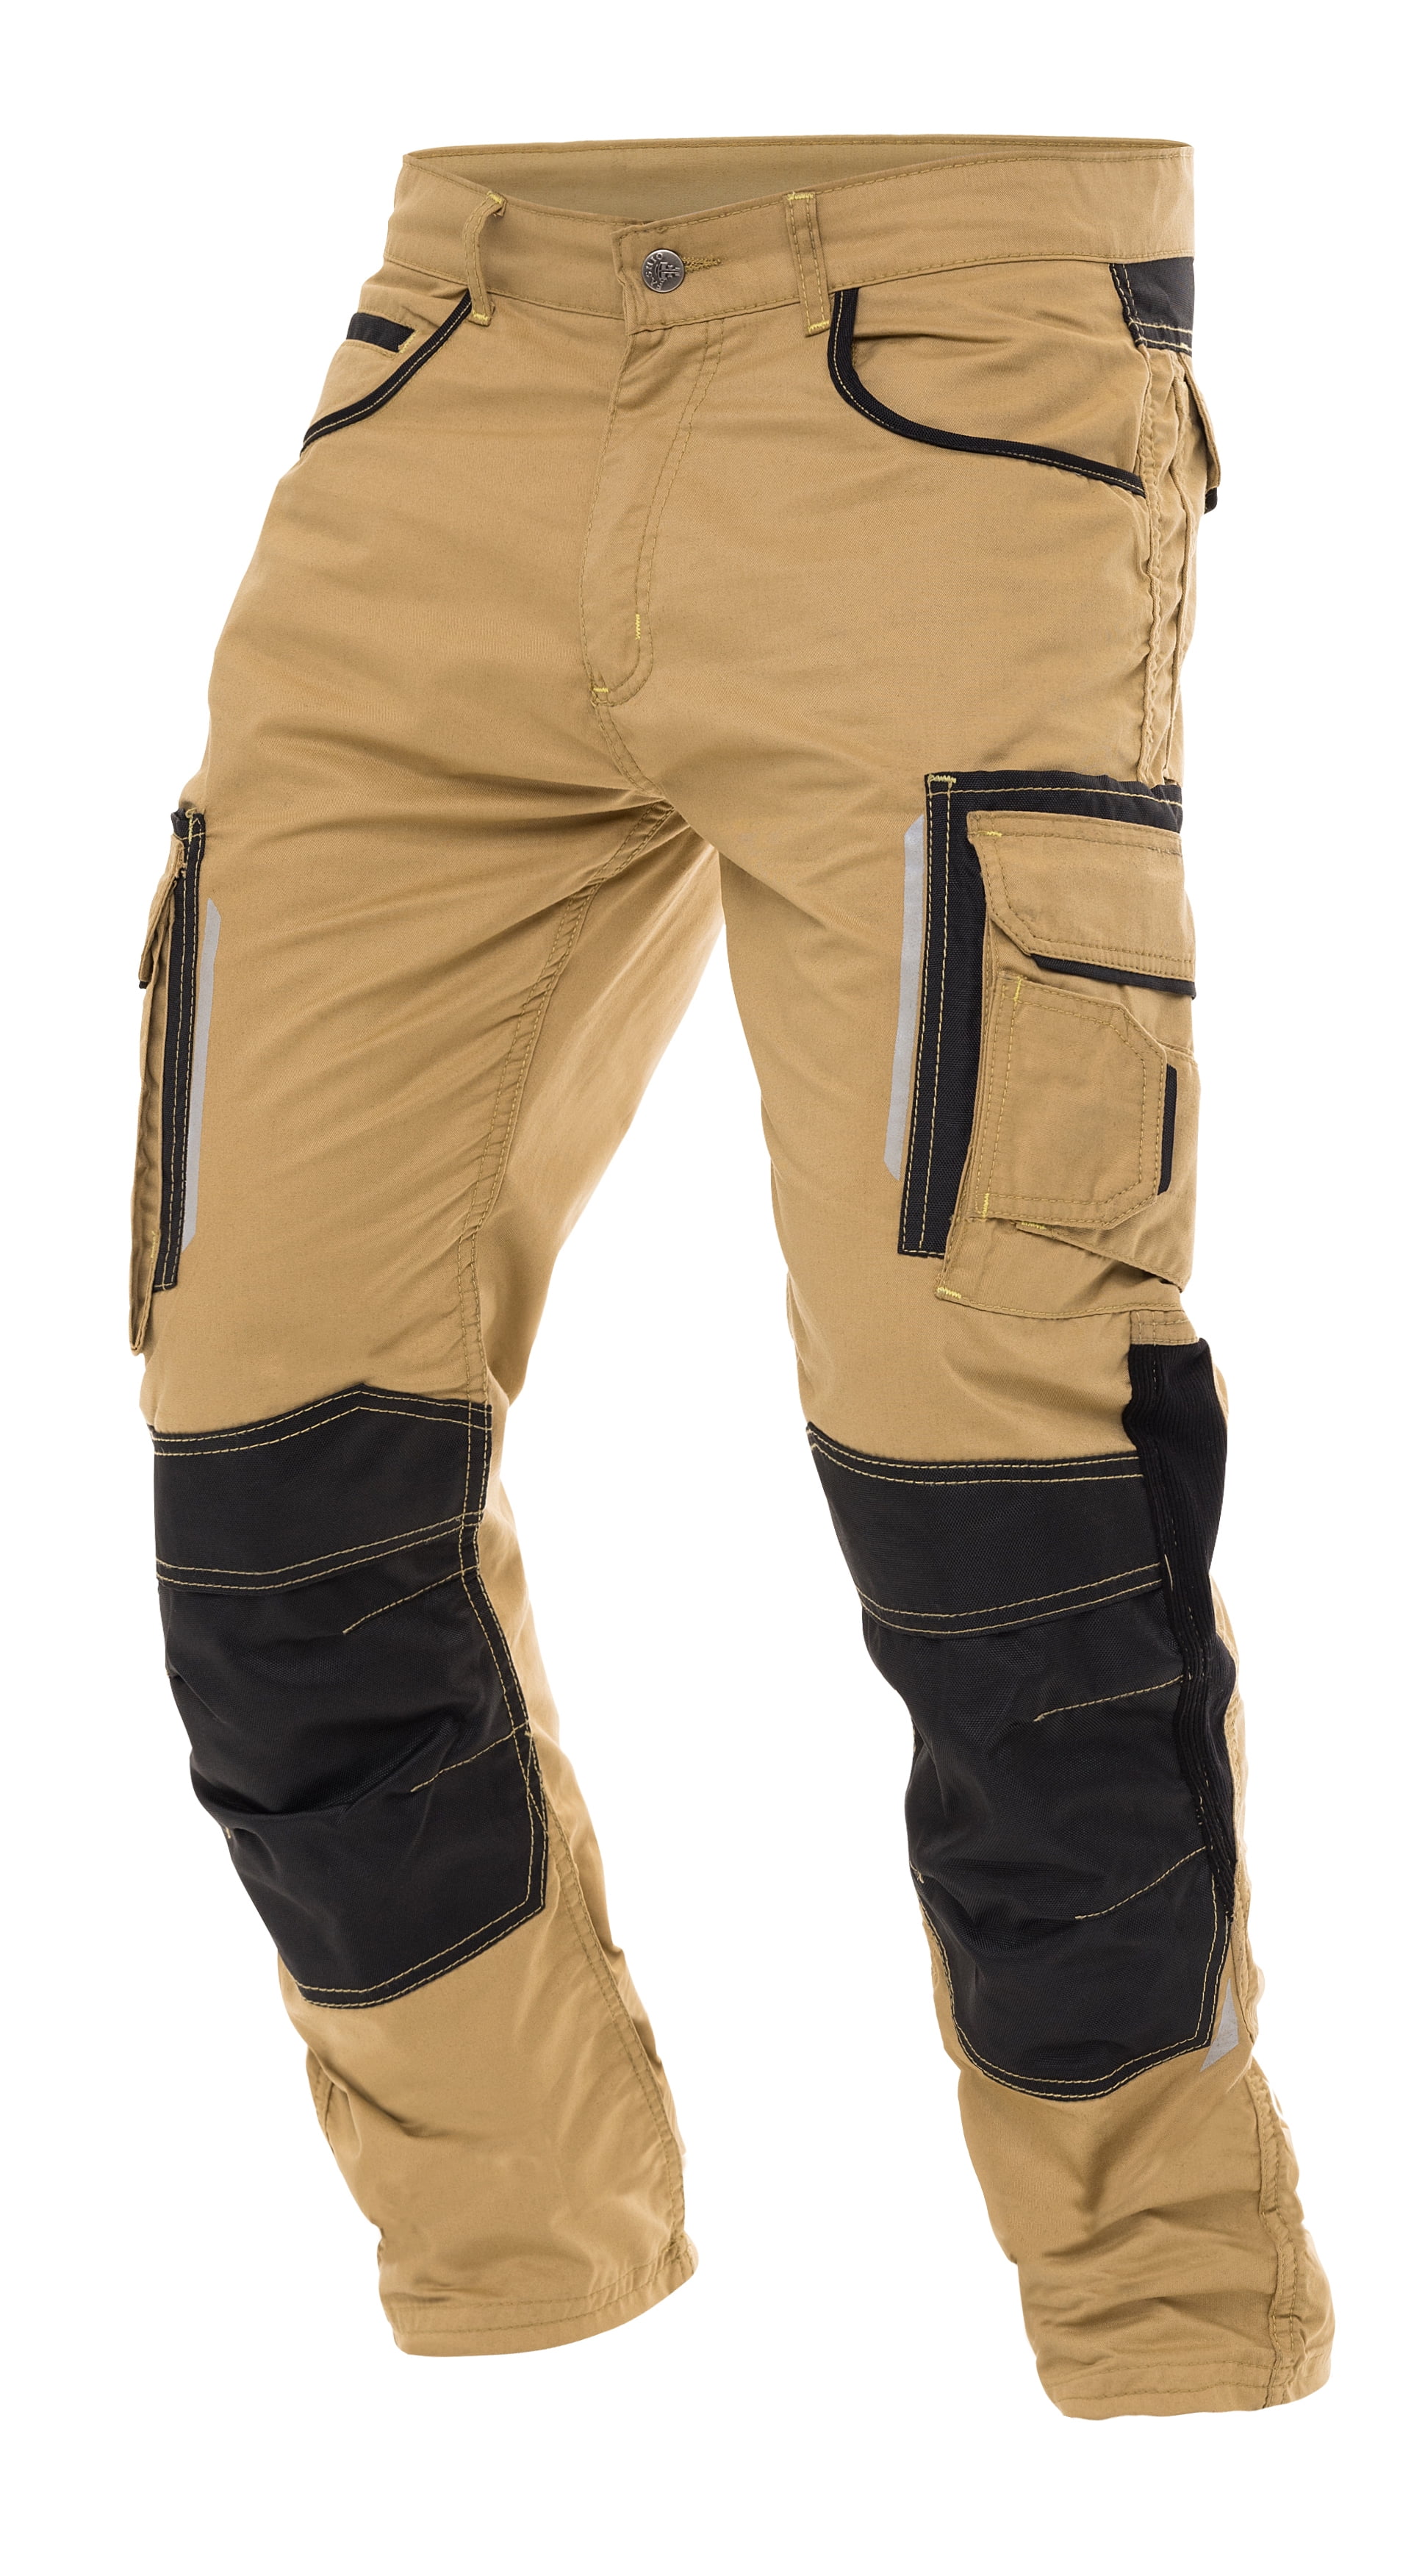 Mens Work Trousers Removable Holster Pocket Heavy Duty Cargo Combat Utility Pant 